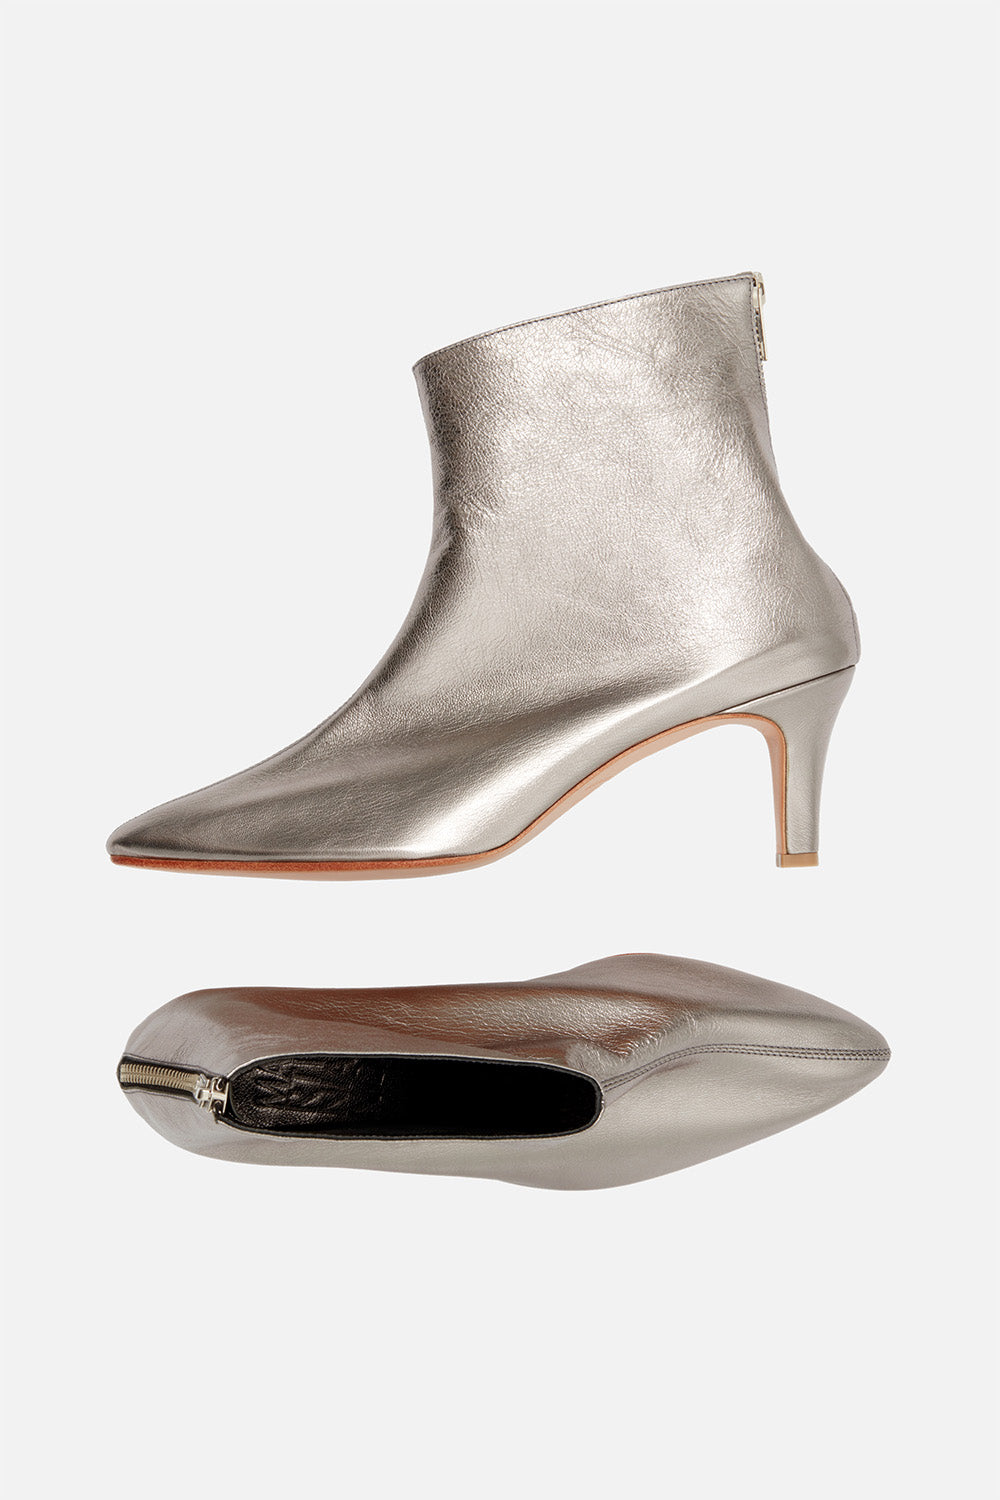 Martiniano - Party Boot - Pewter